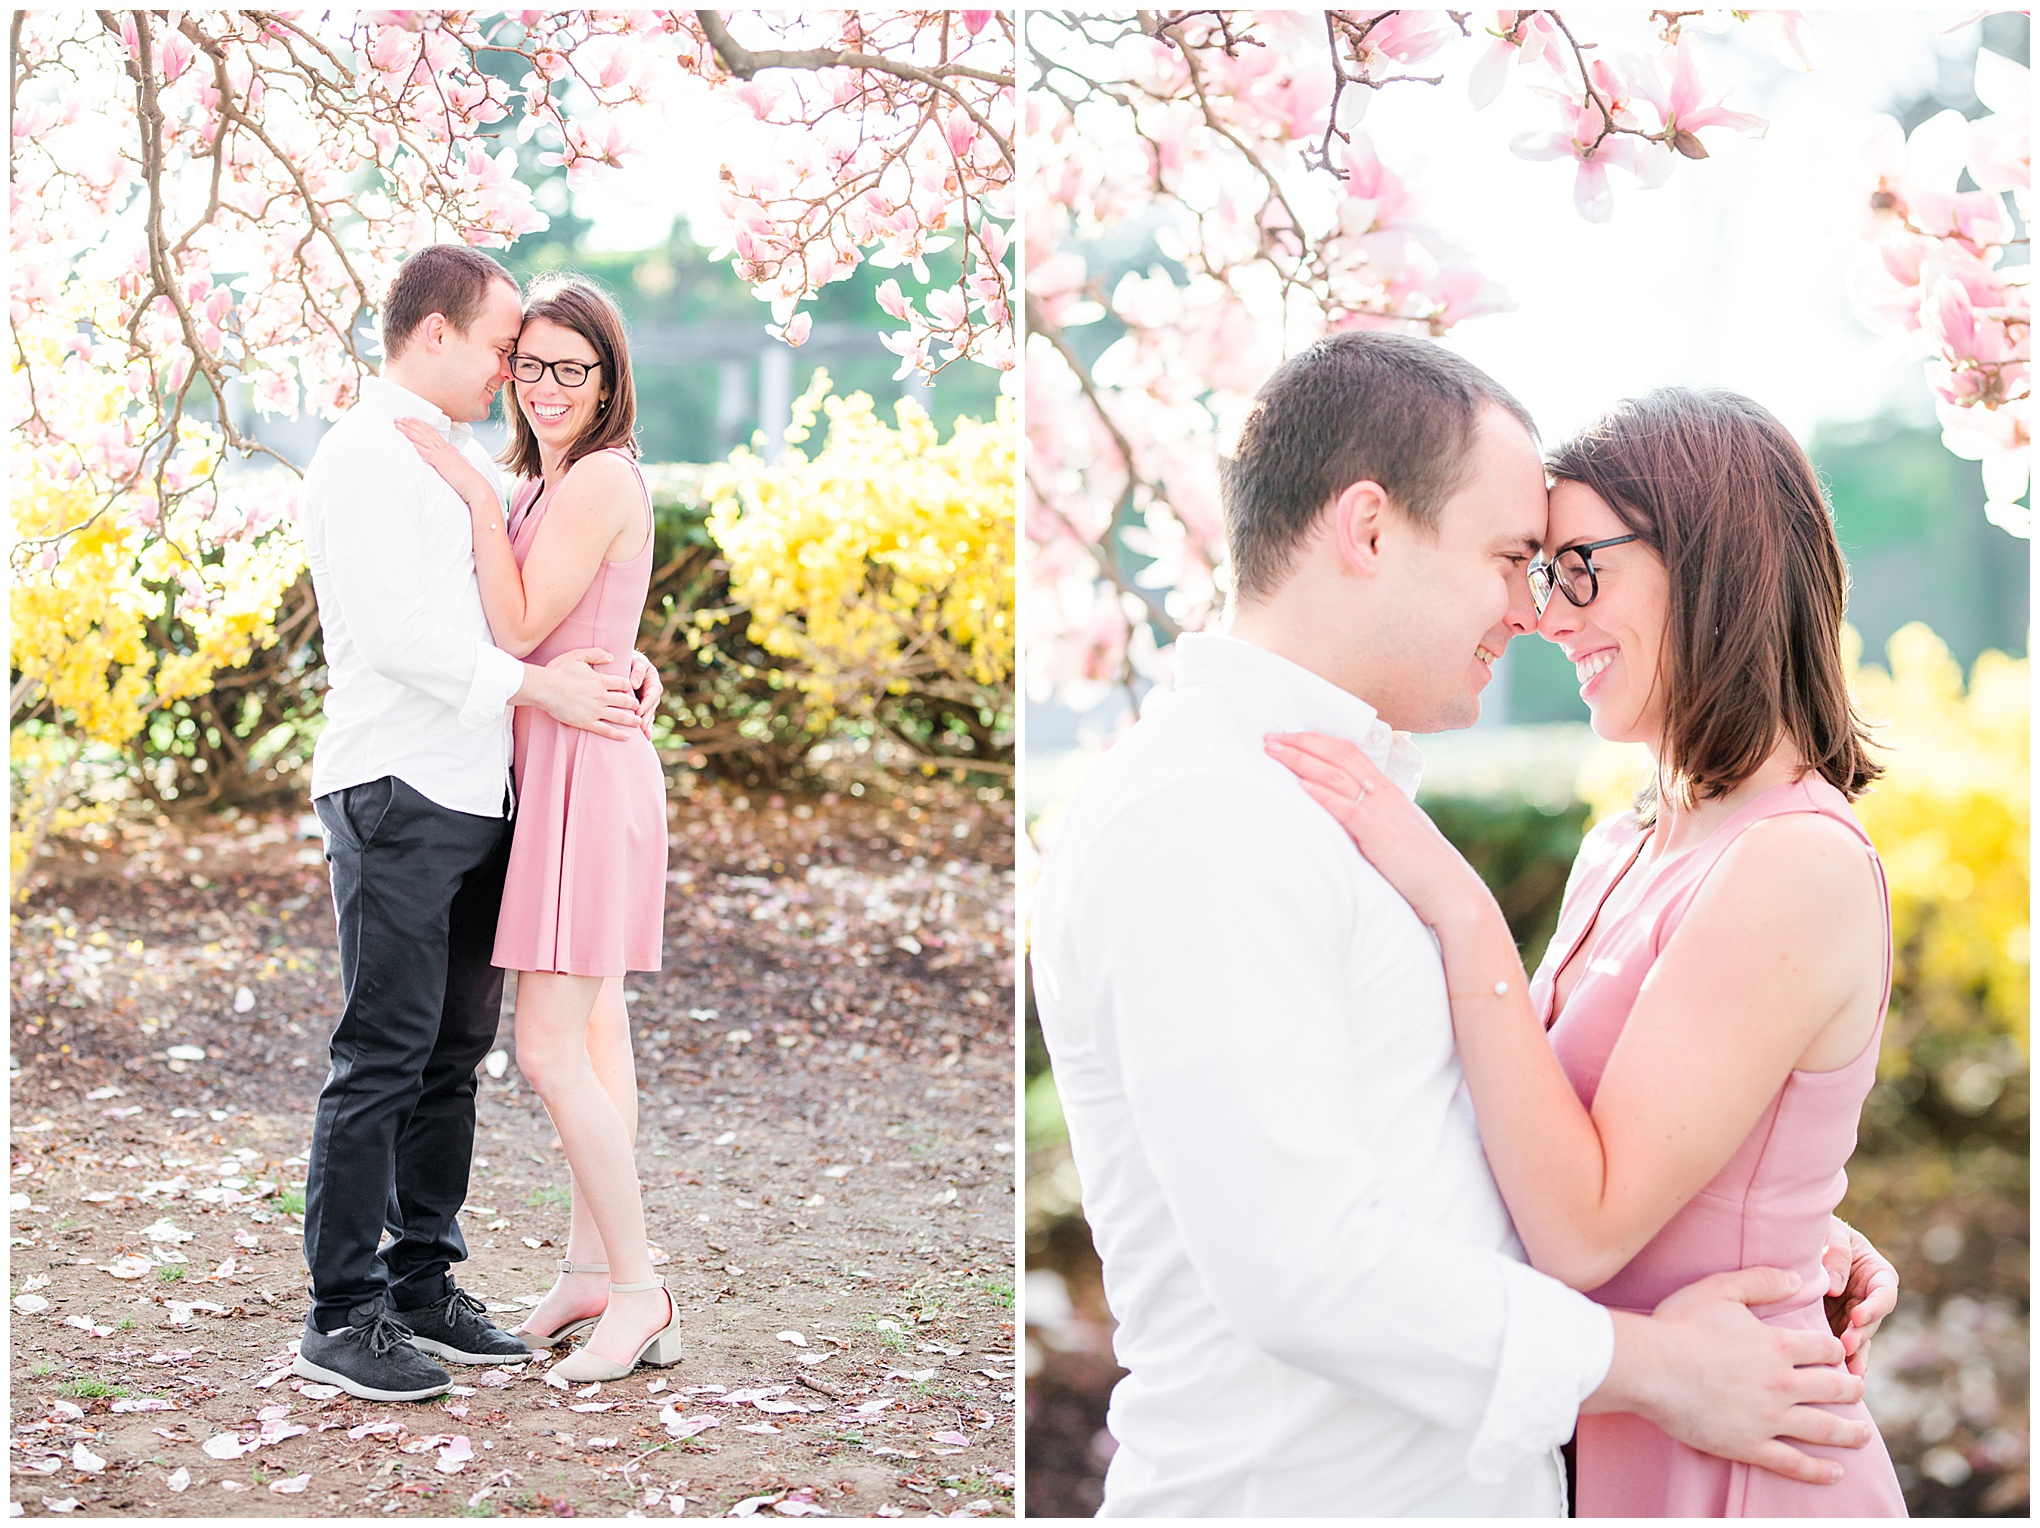 sunny cherry blossoms engagement session, Washington, D.C. engagement photos, Washington D.C. engagement photos, sunrrise engagement photos, cherry blossom engagement photos, D.C. cherry bloossoms, D.C. cherry blossoms photos, cherry blossom photos, cherry blossoms portrraits, sunny engagement photos, classic engagement photos, Rachel E.H. Photography, engagement session style, magnolia trees